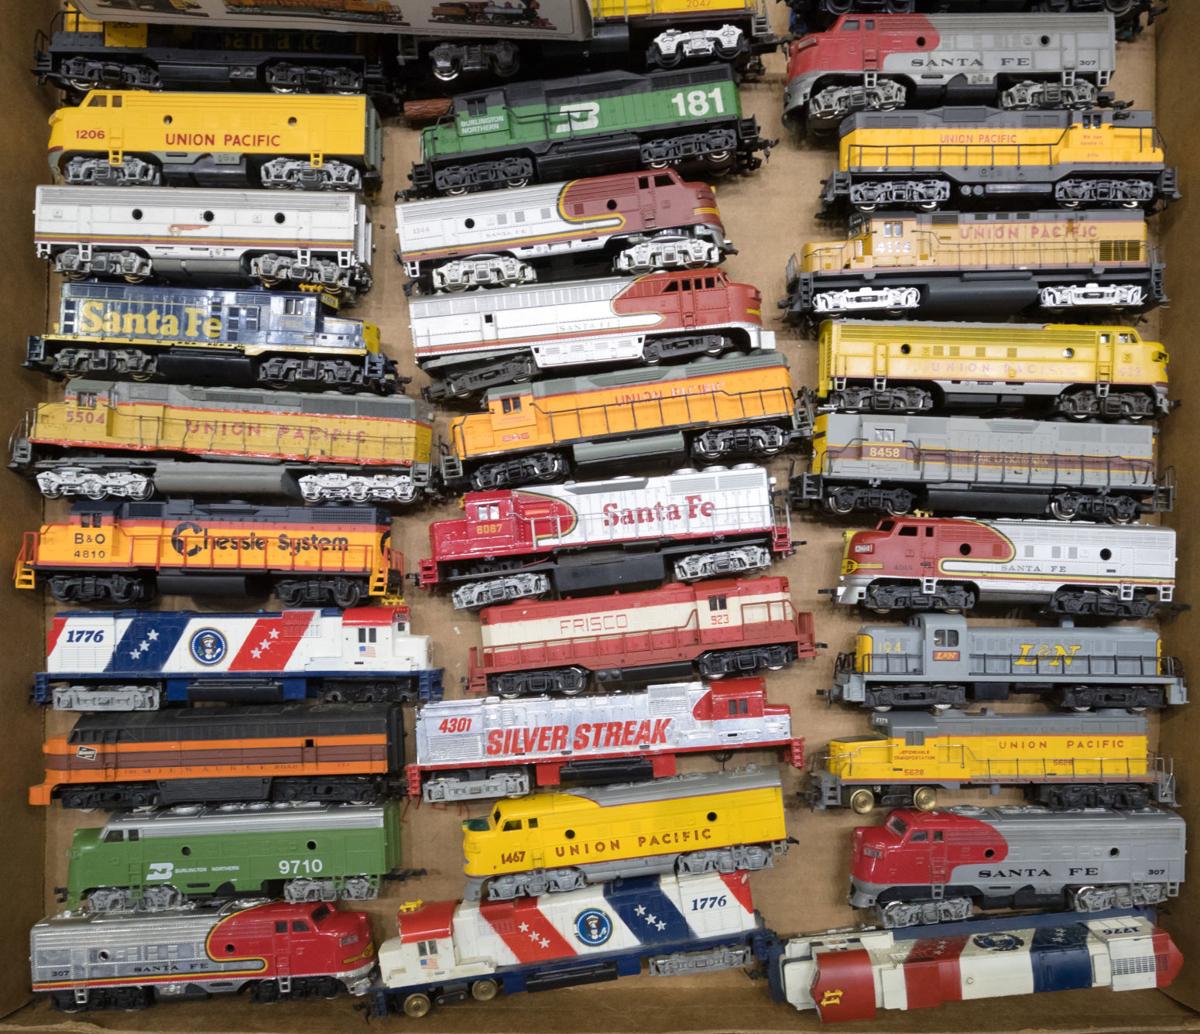 At the Great Train Show in Council Bluffs, exhibits inspire the next